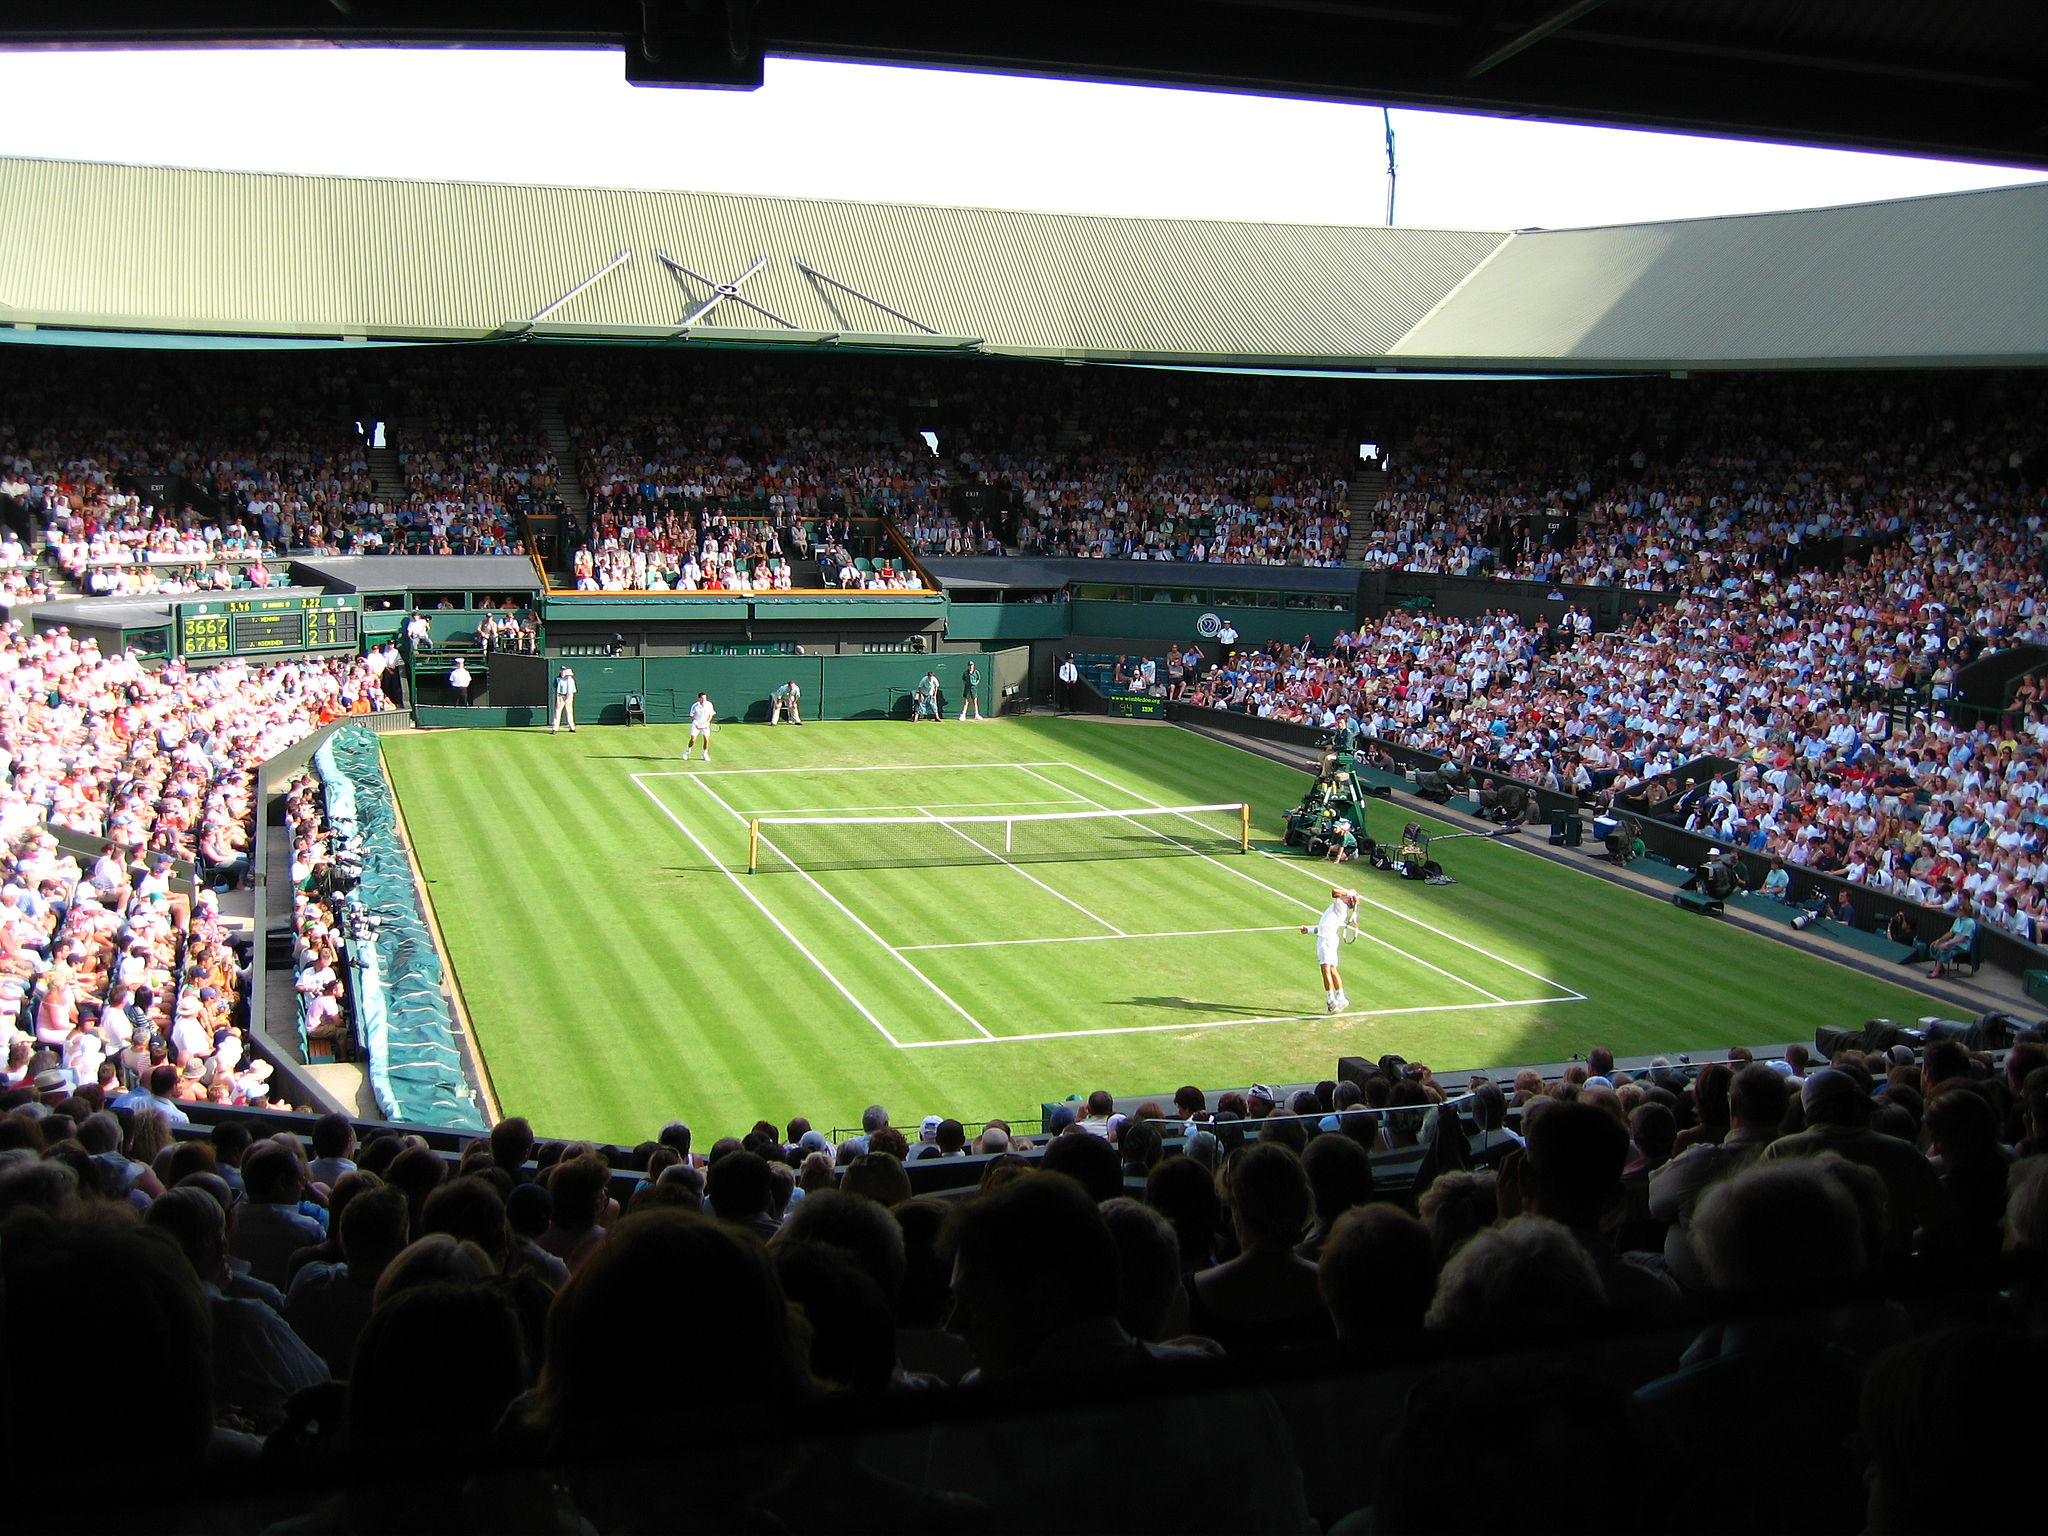 By Spiralz from England (5.46pm ~ Centre Court) [CC BY 2.0 (http://creativecommons.org/licenses/by/2.0)], via Wikimedia Commons